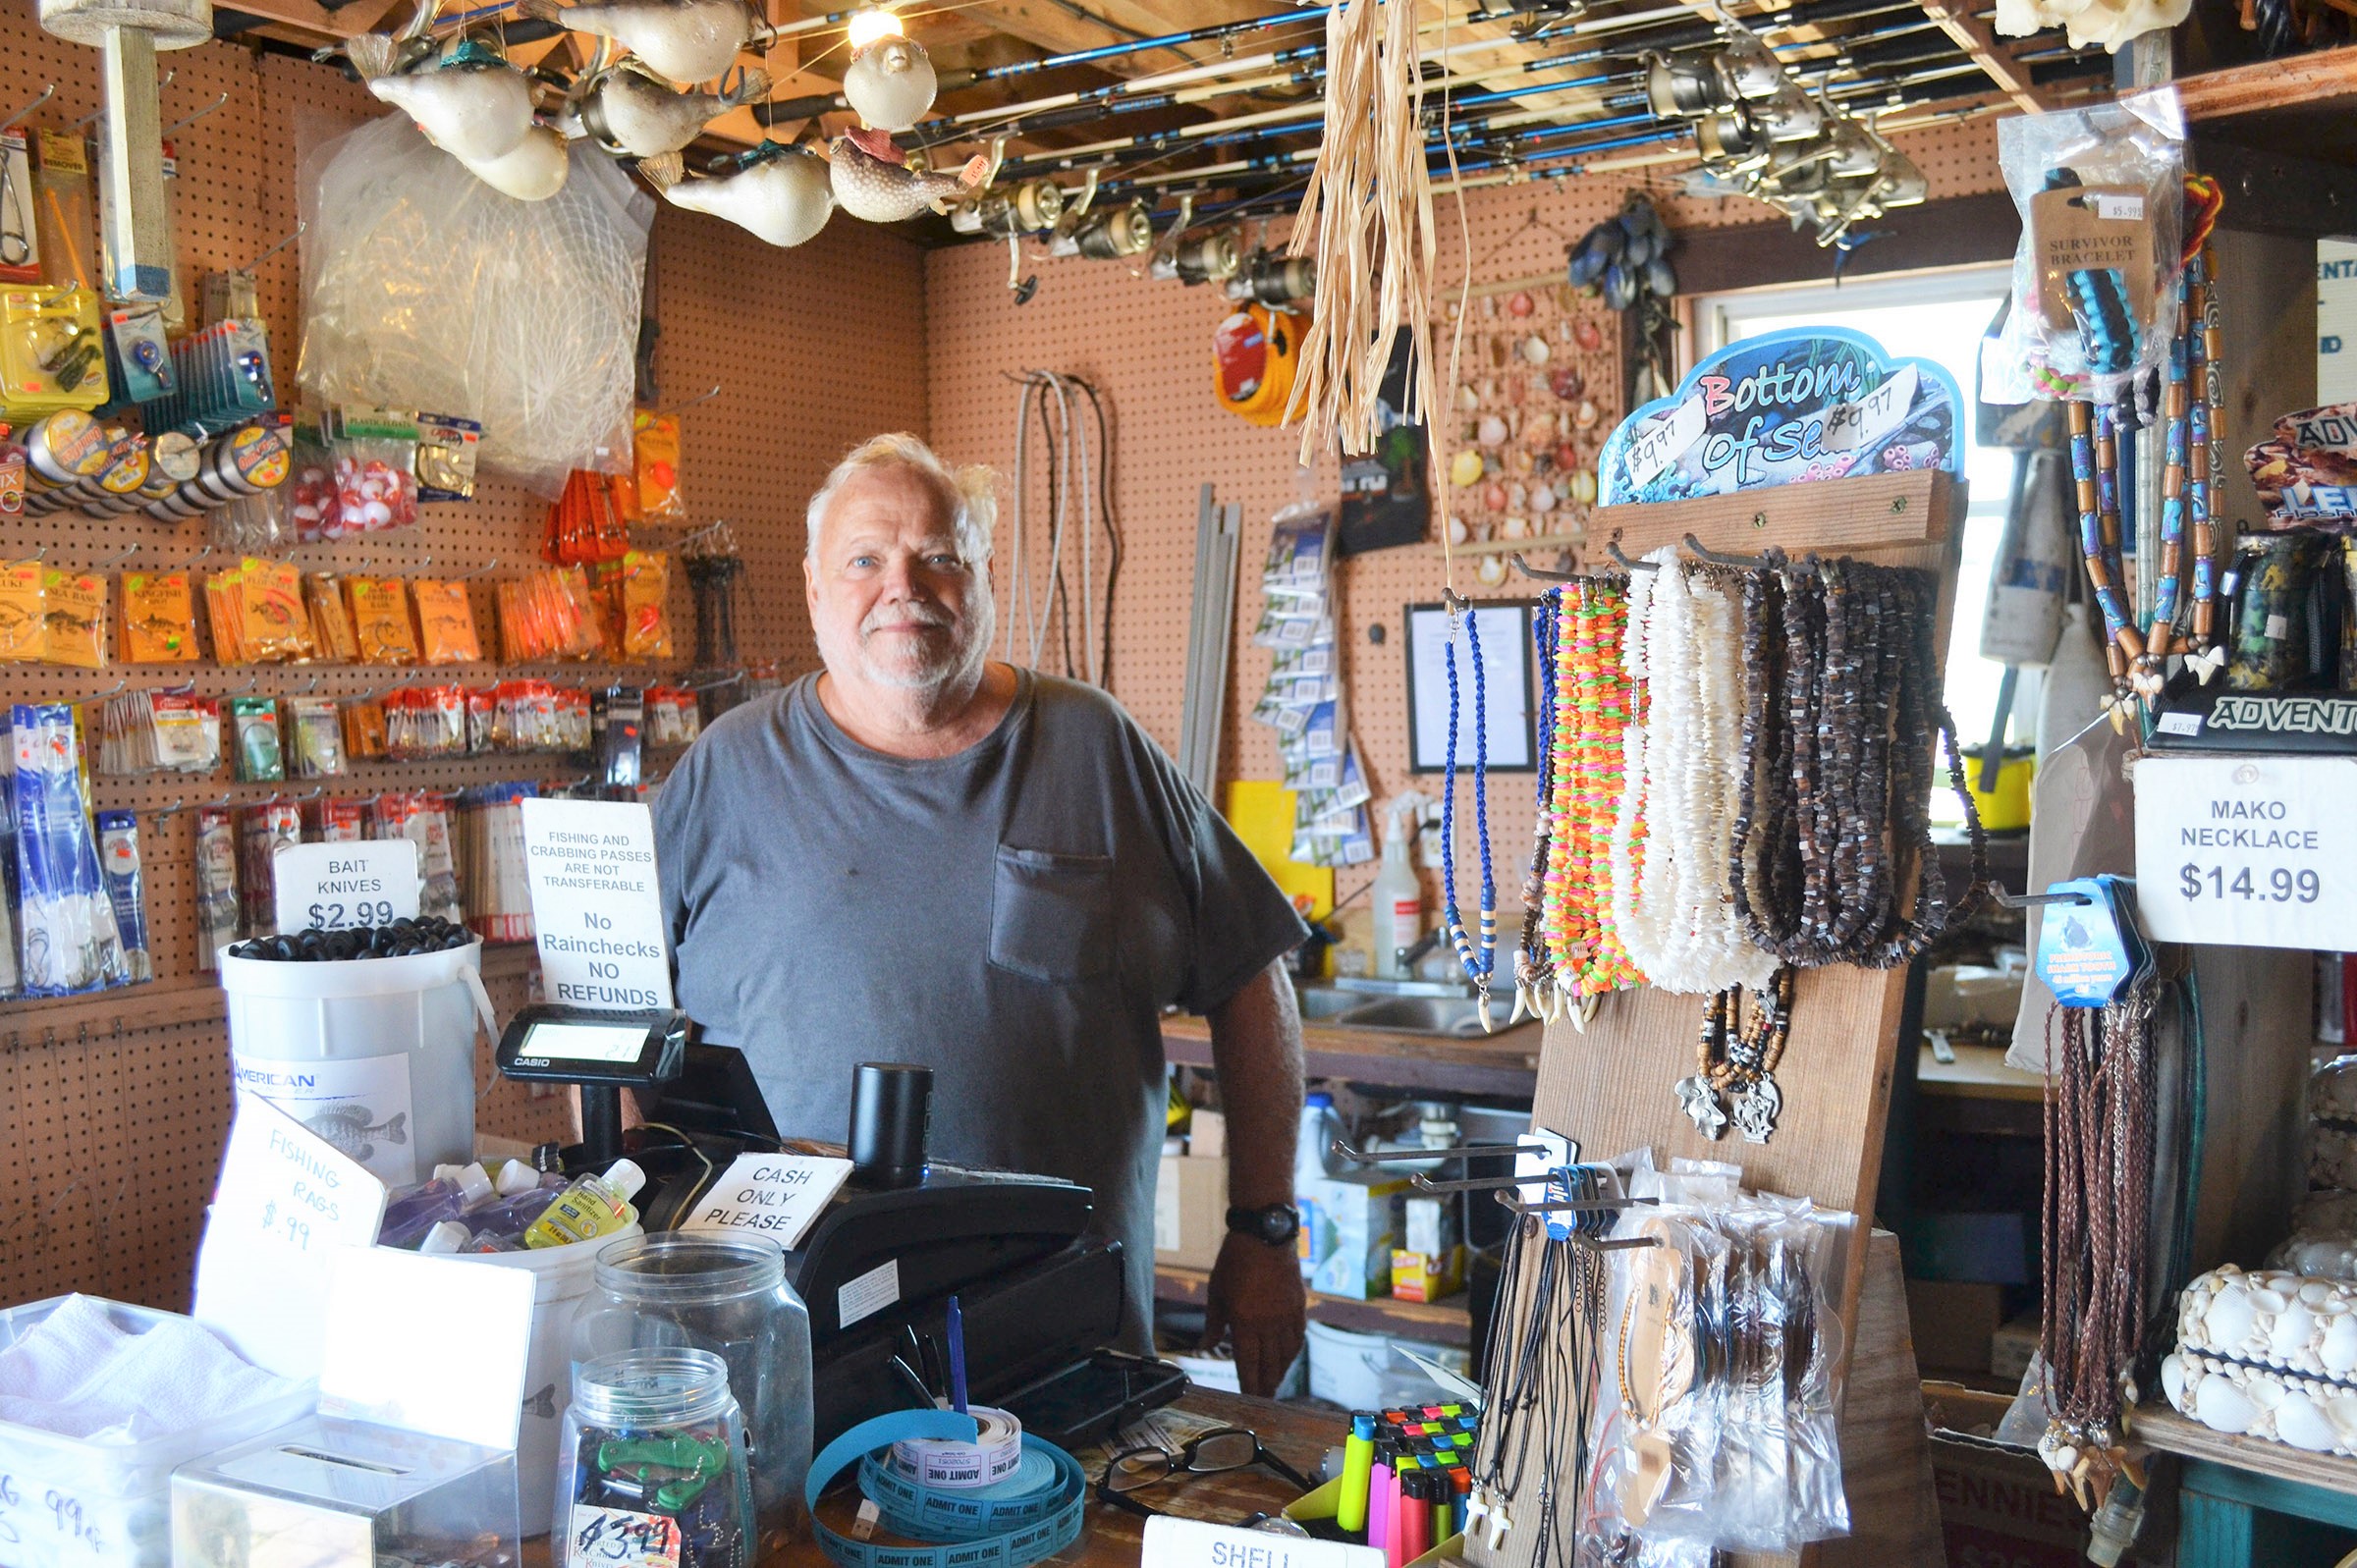 08/01/2019, 'Fishing Pier Pete' Loves His Job, Helping People; Jones A  Mainstay On Wicomico Street For 23 Years